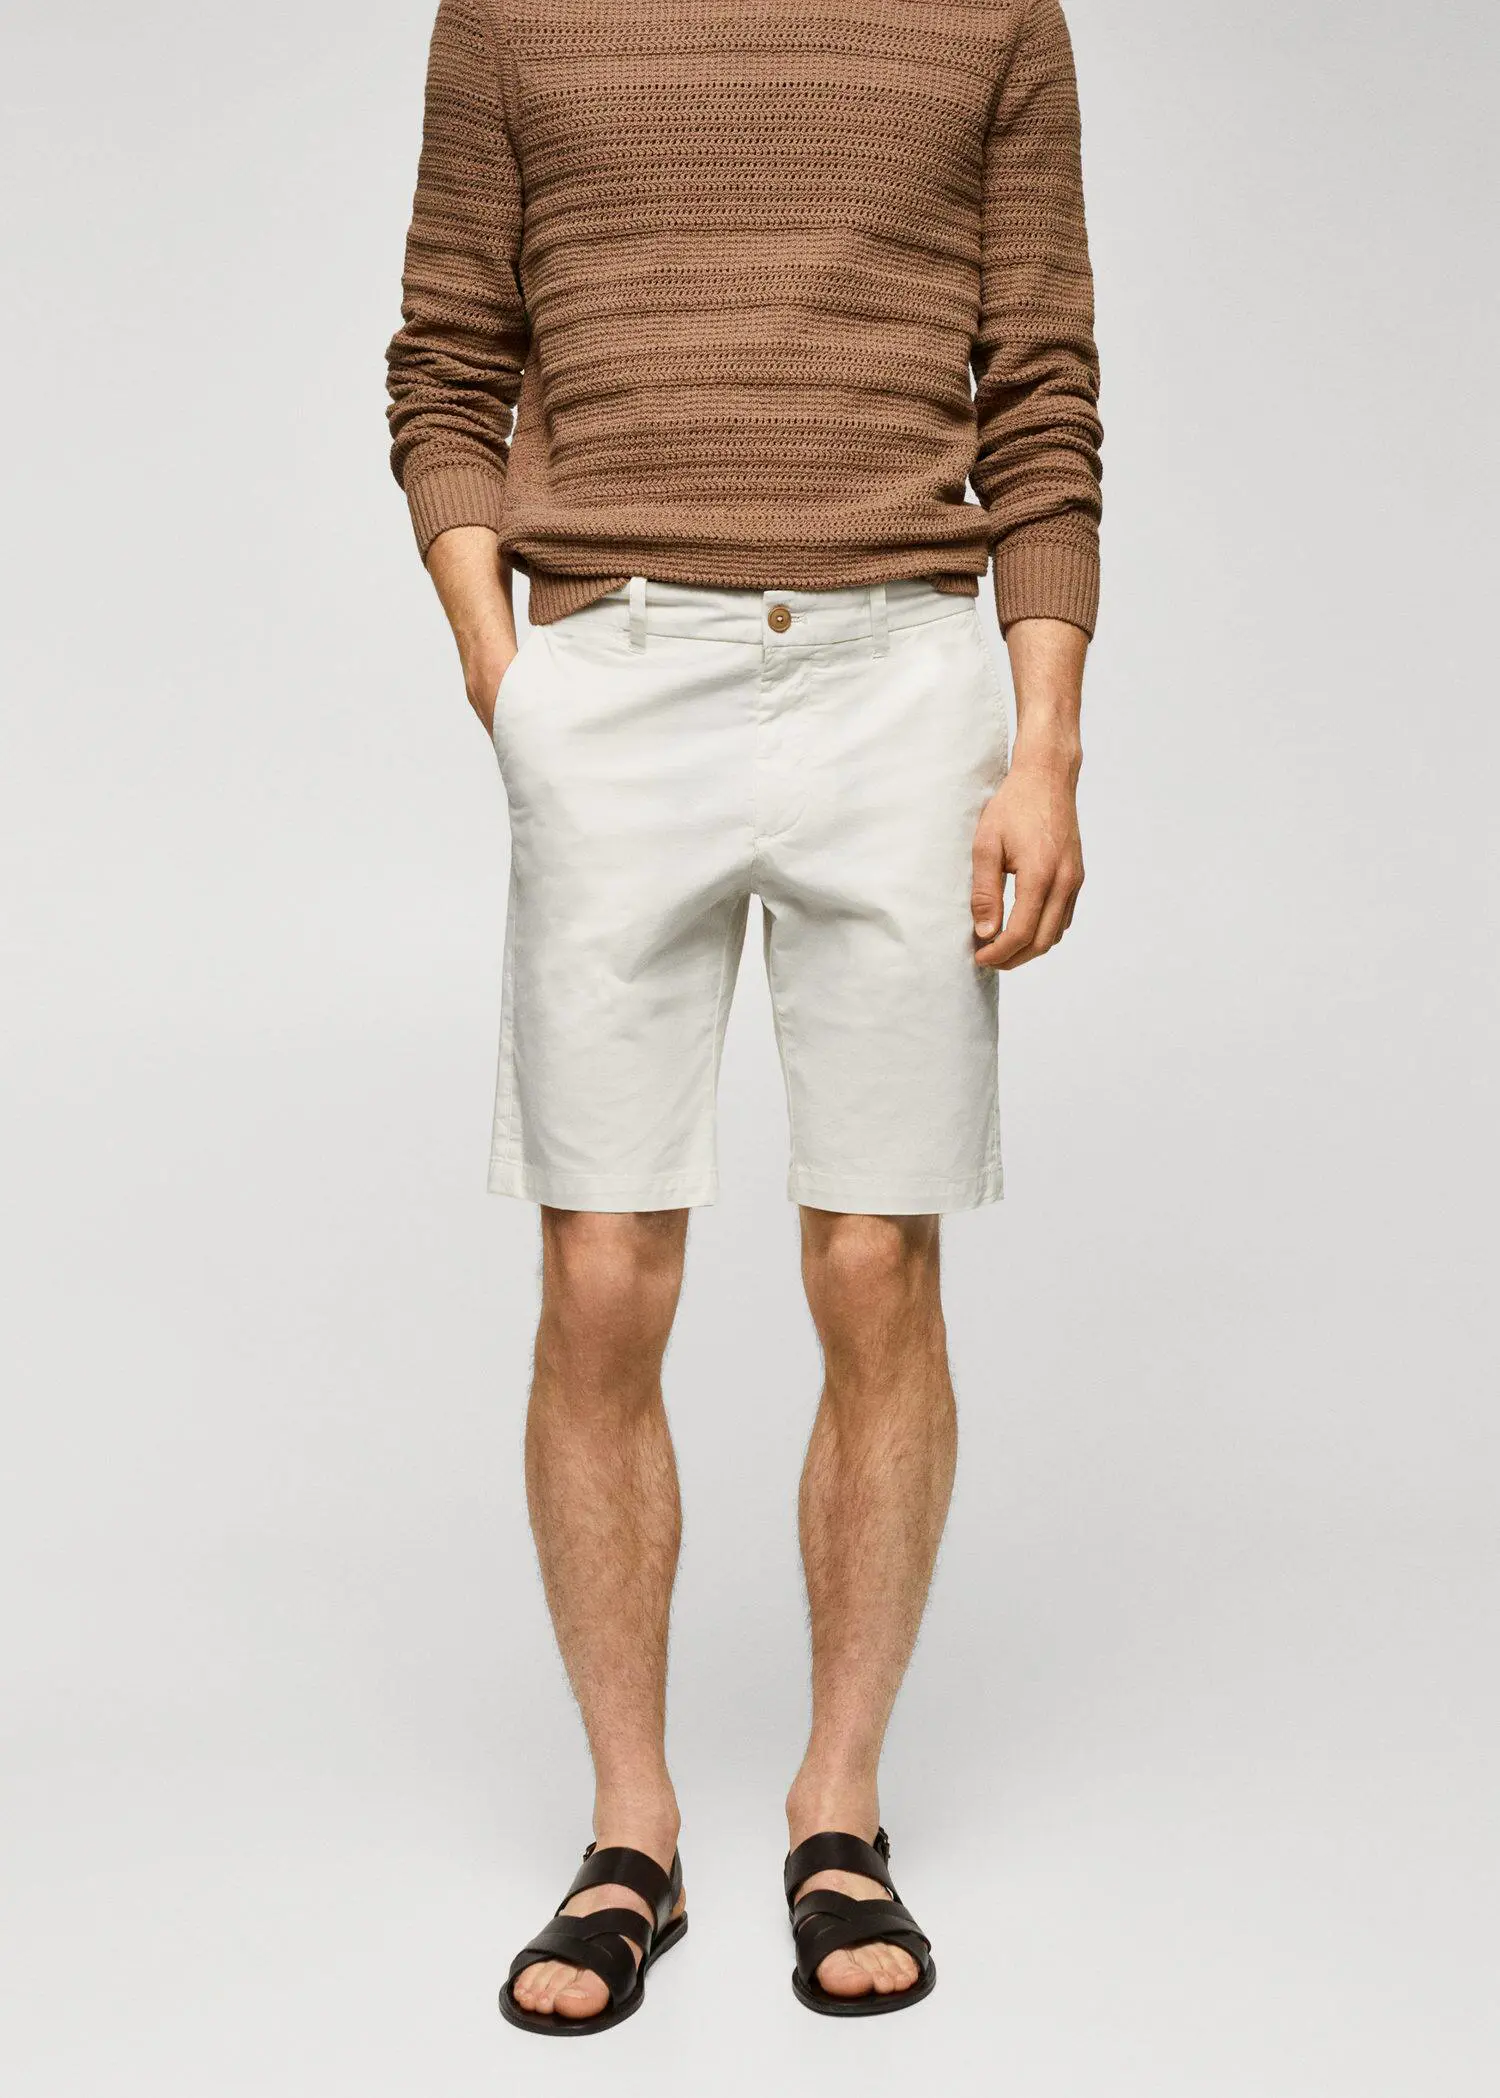 Mango Chino Bermuda shorts. a man in white shorts and a brown sweater. 